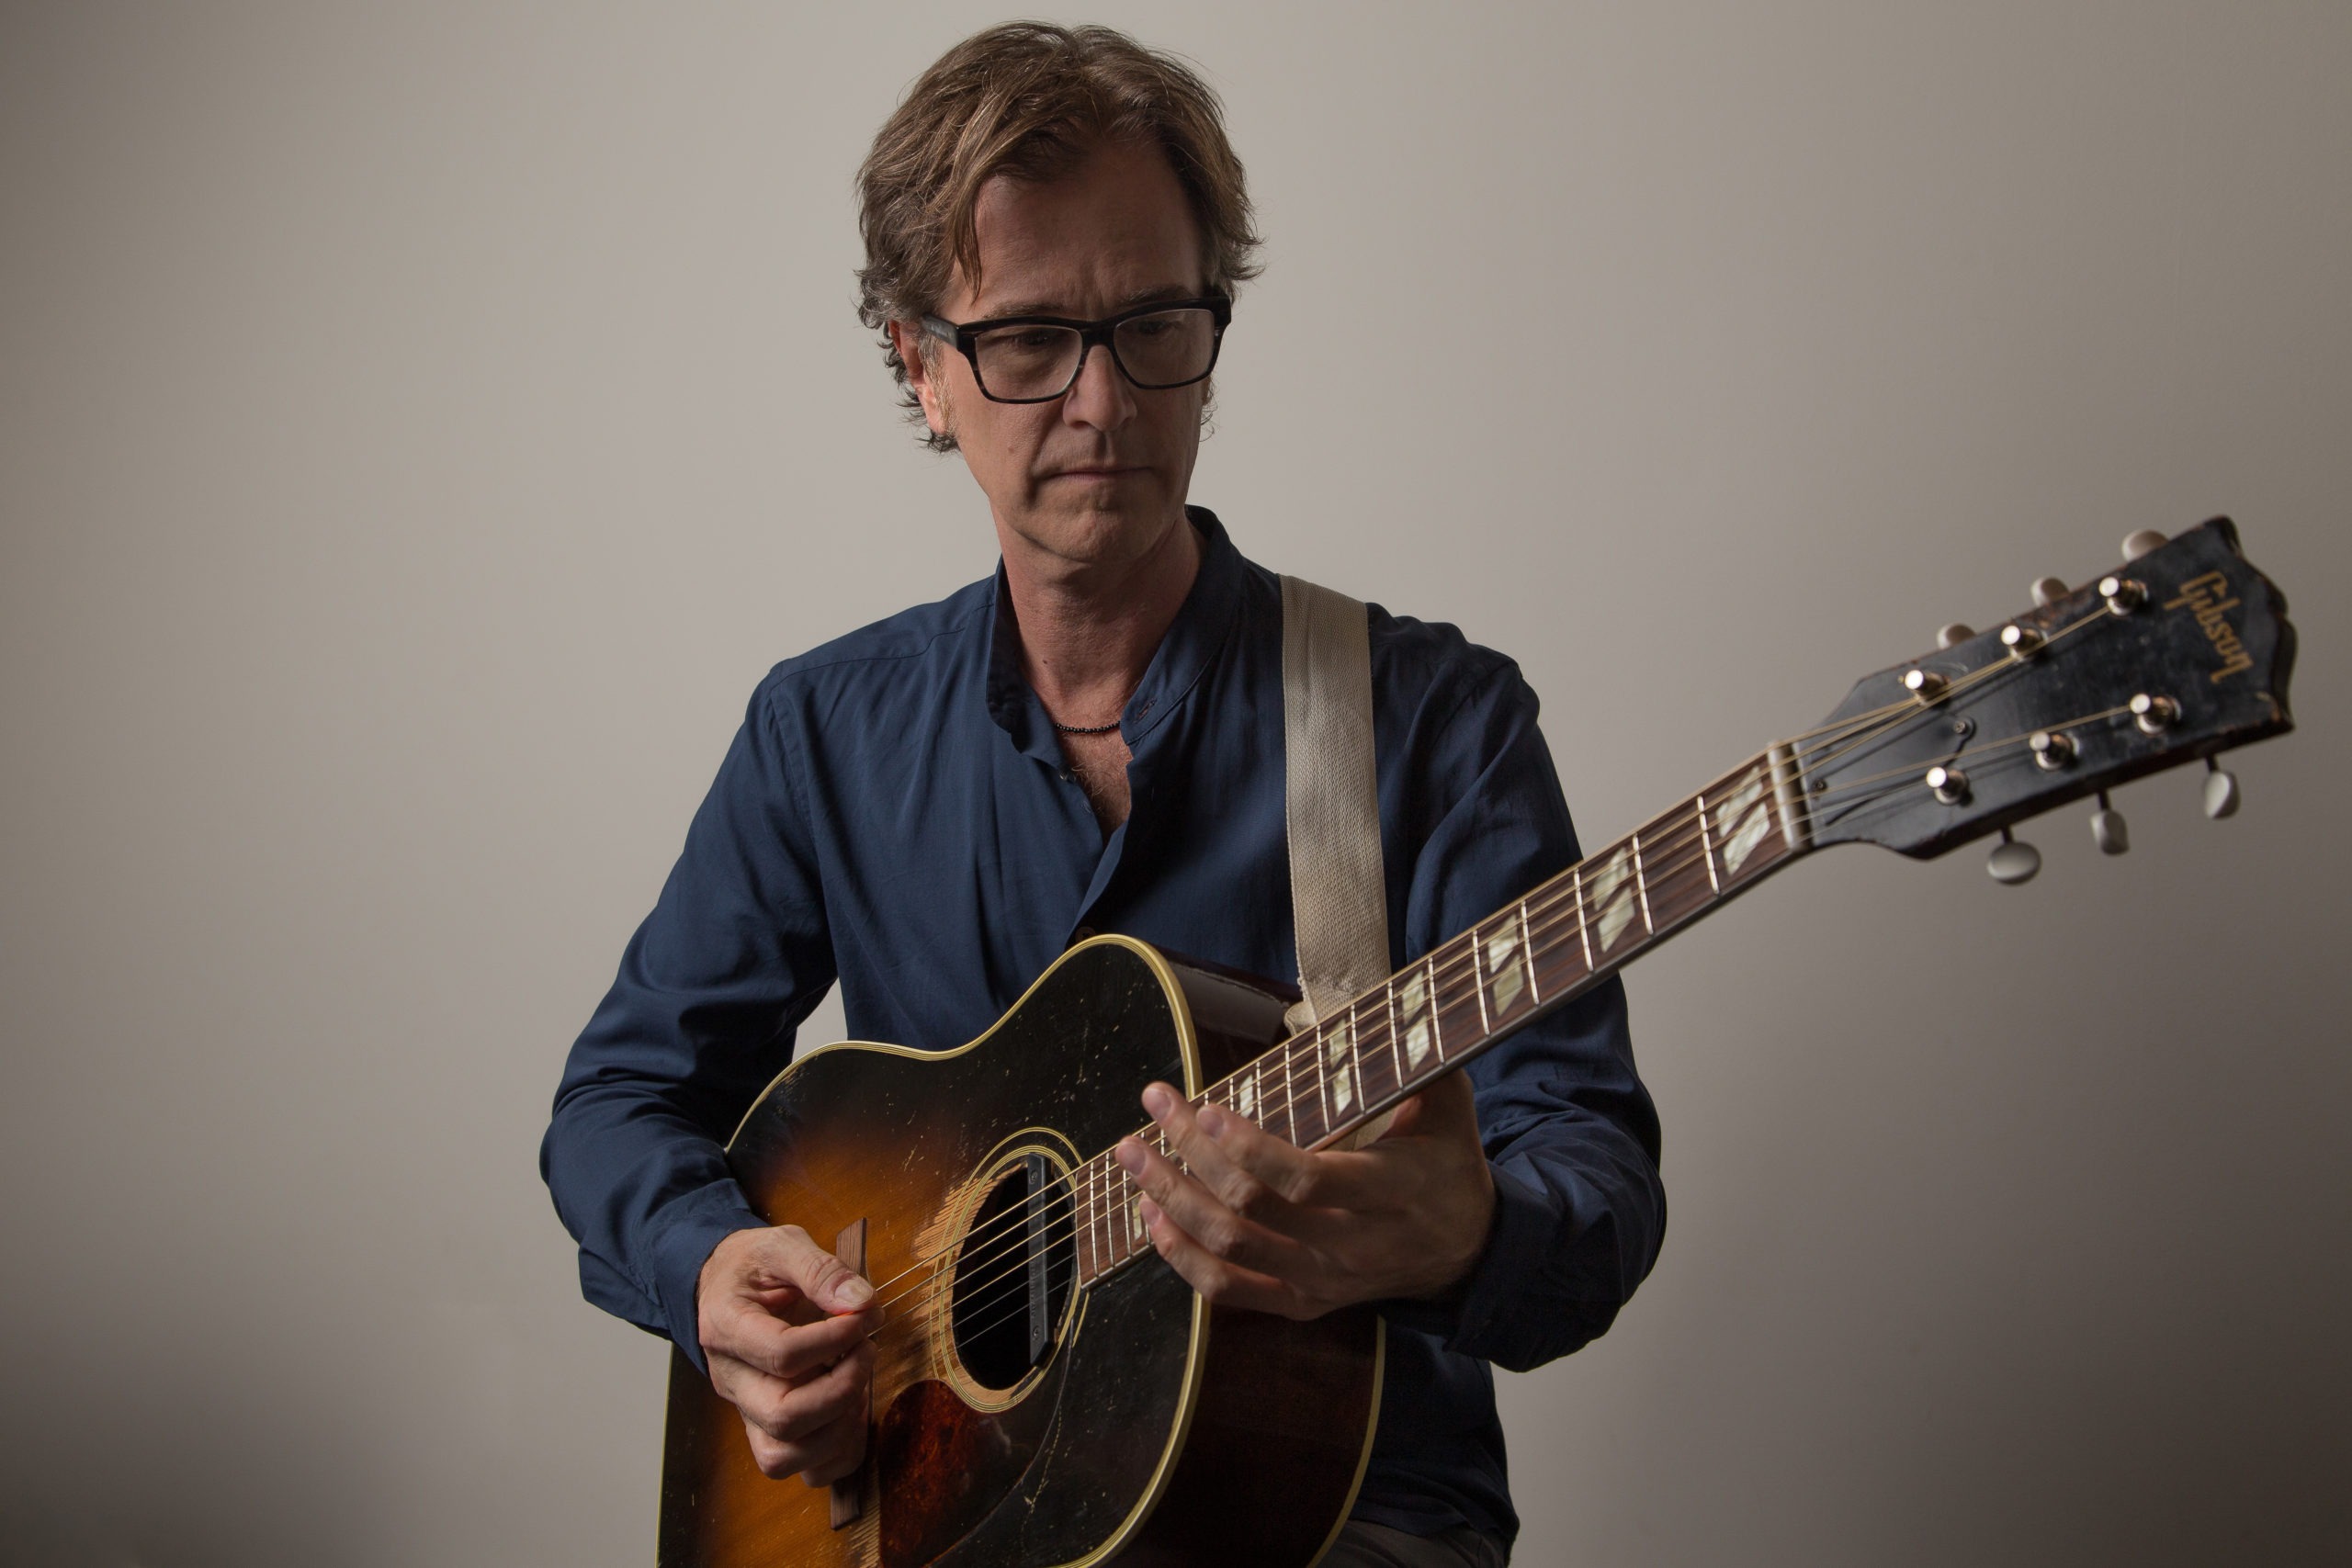 DAN WILSON Asks "What If We Survive This?" In New Single "The Real Question" 